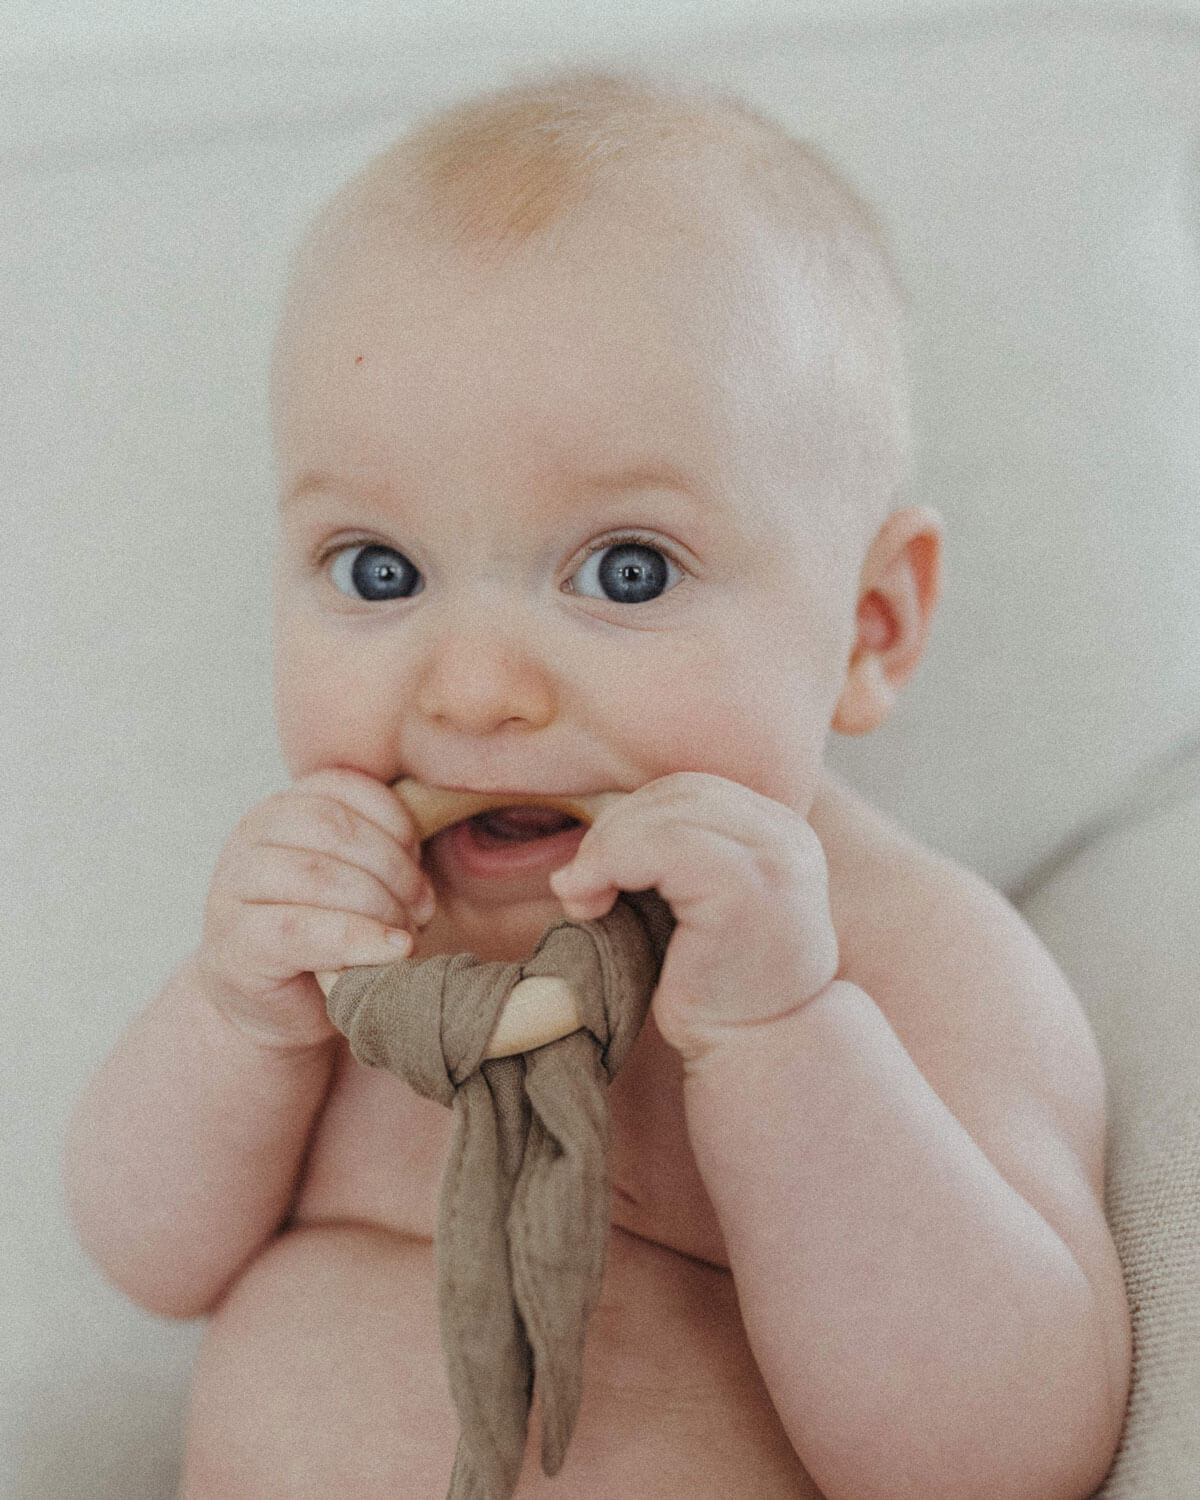 5 Best Teething Toys for Babies: Our Favorite Teethers